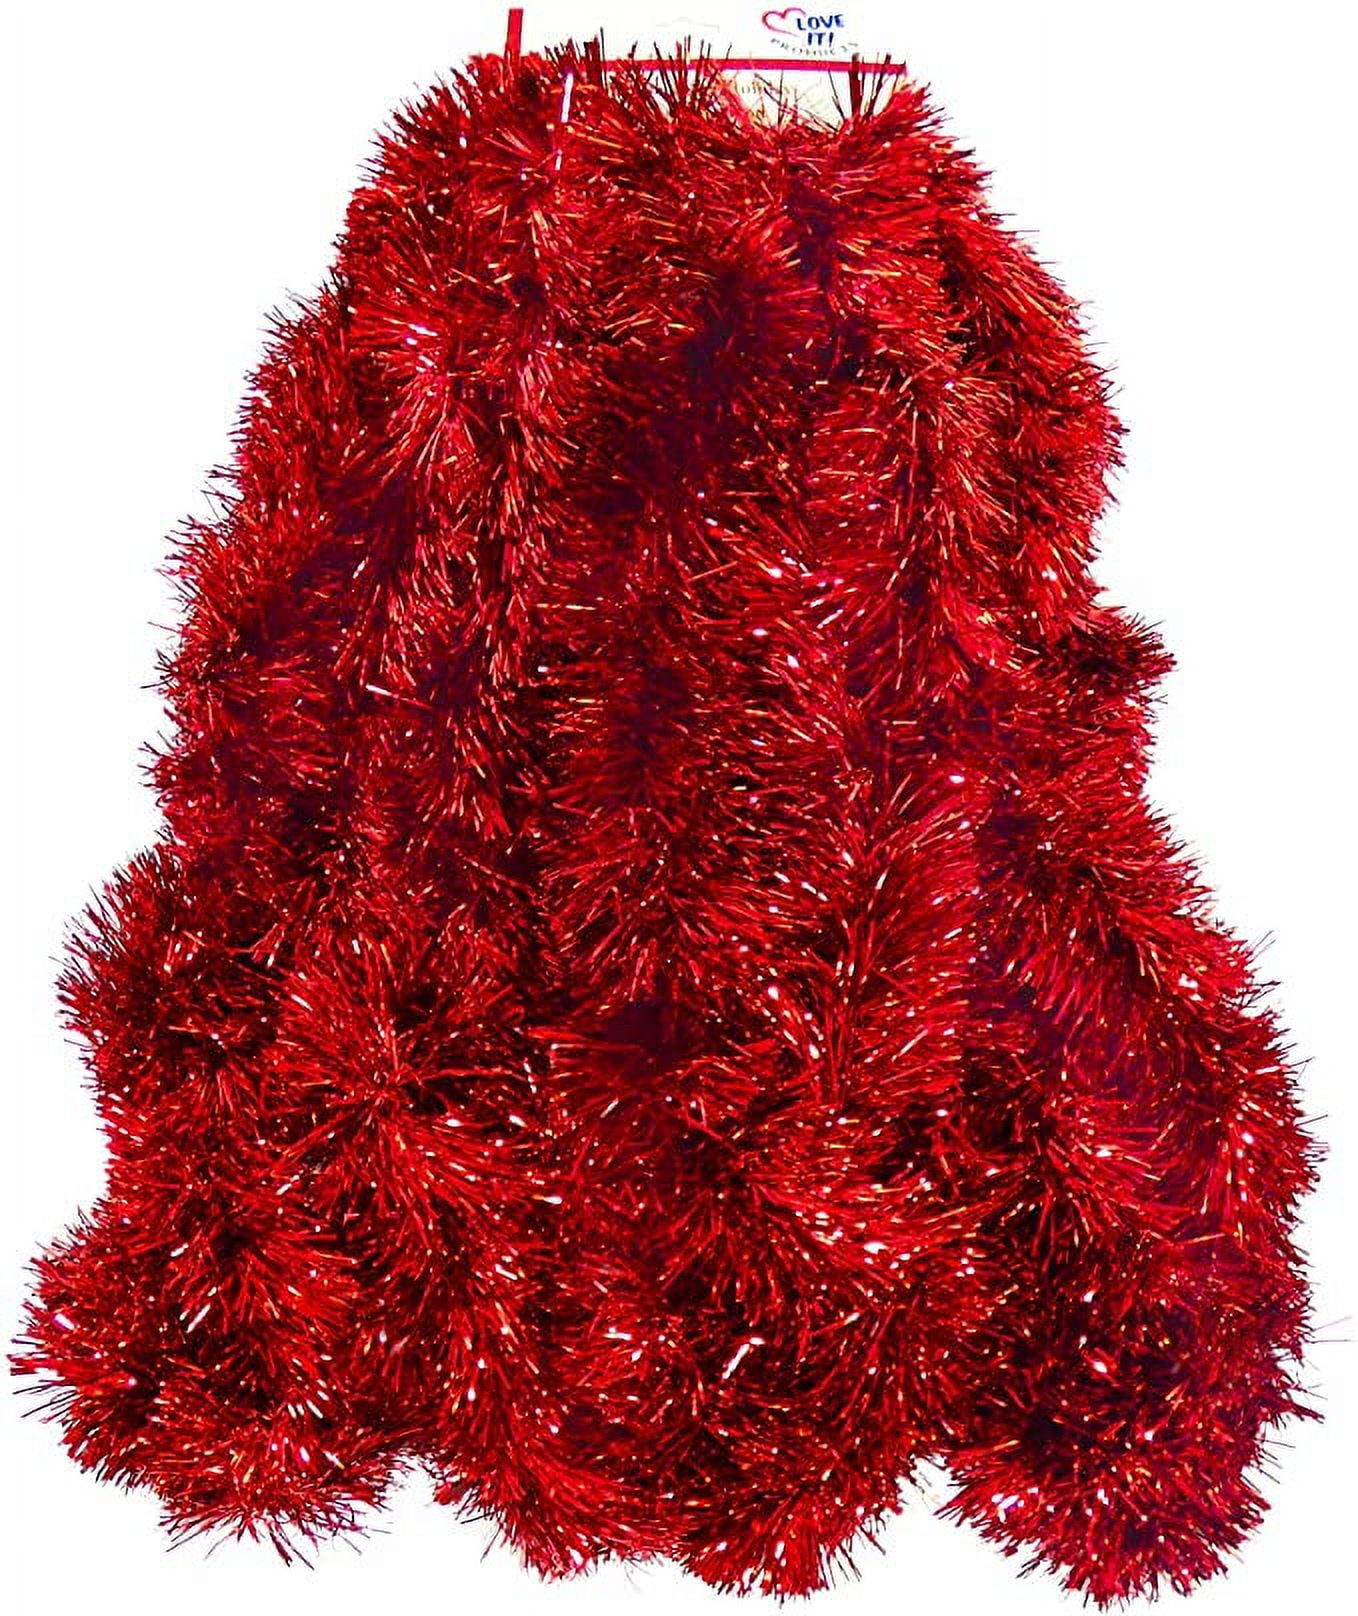 Love It Products 25 Ft. Long Seasonal Holiday Tinsel Garland from Use ...